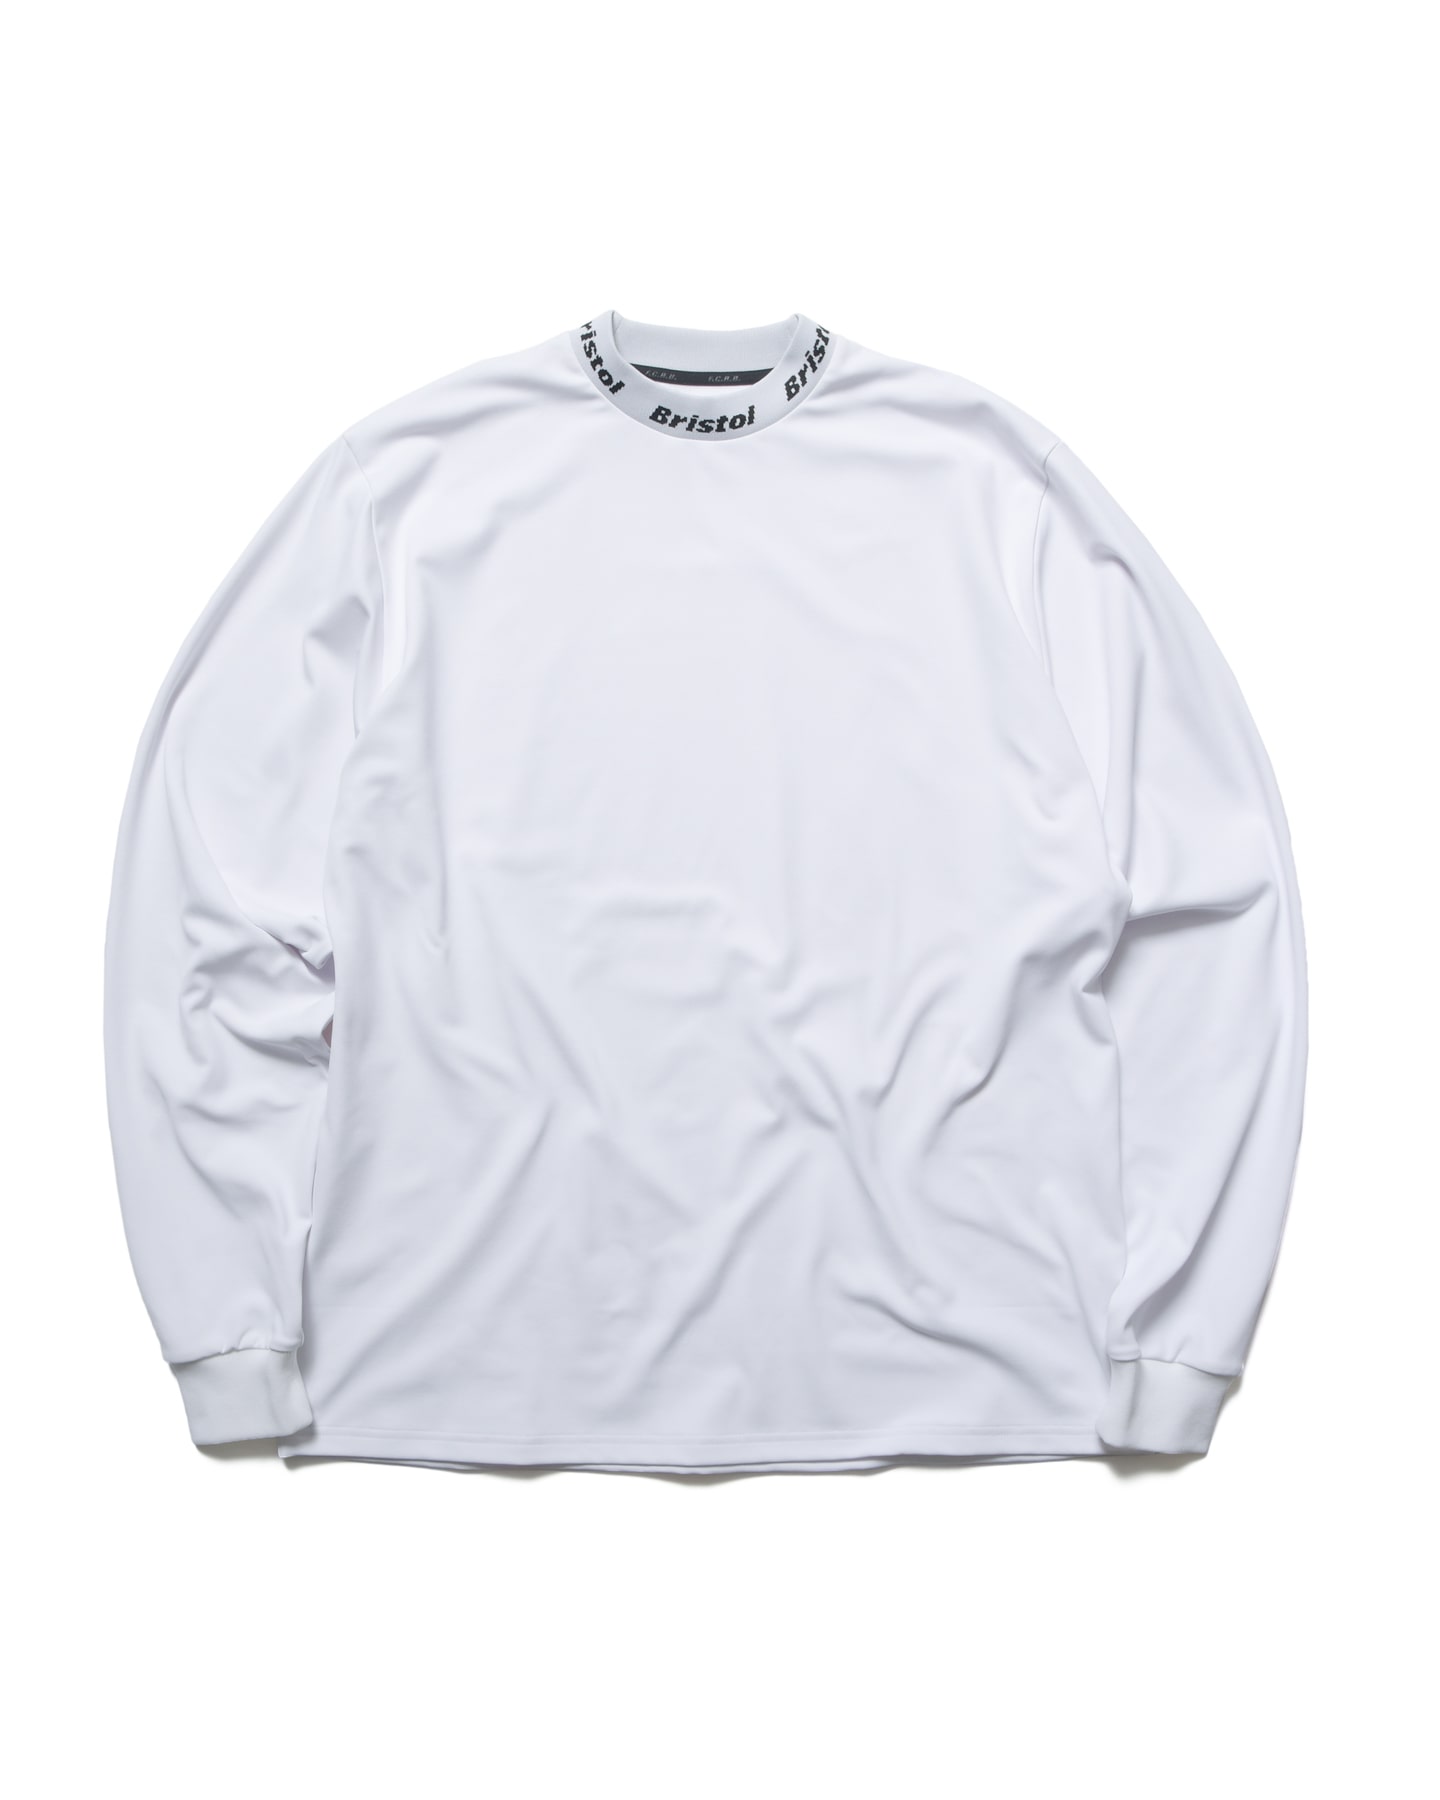 S fcrb WINDPROOF NECK LOGO L/S BAGGY TOP